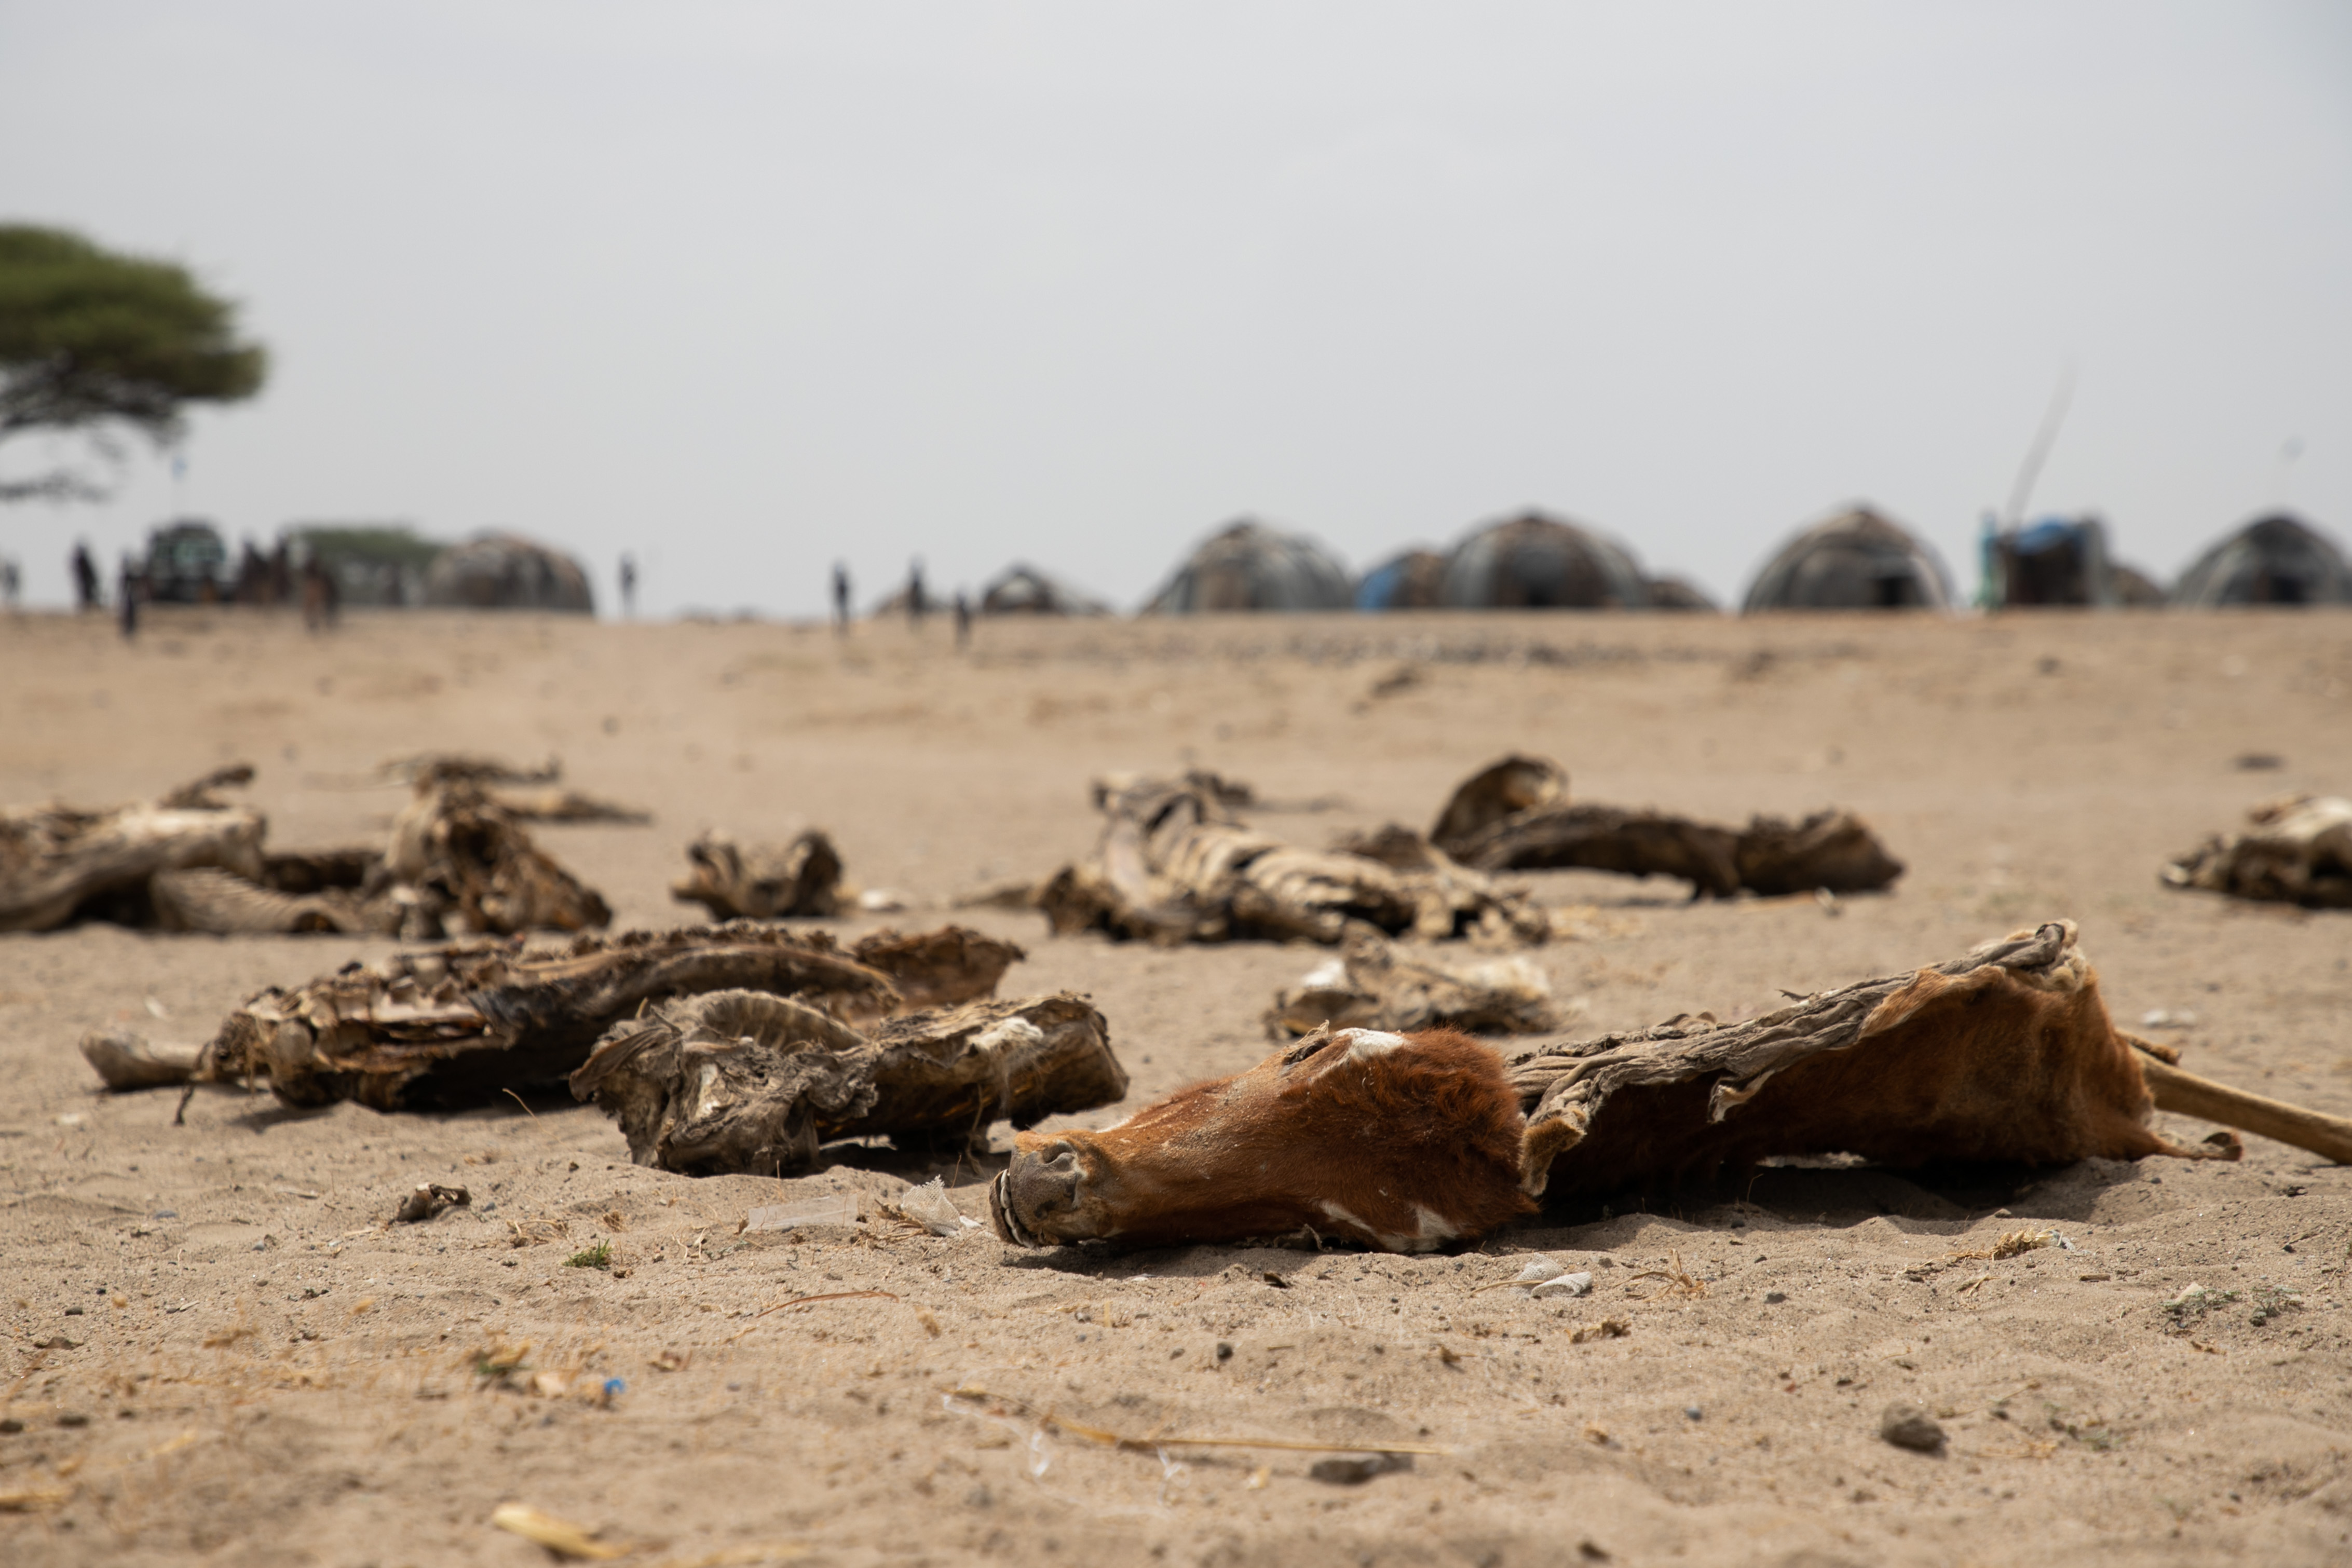 The bodies of cattle killed by devastating drought in Ethiopia, South Omo, 23 Feburary 2022. In the vast lowland part of the country in South Omo, communities have suffered high death rates among their cattle as a result of the severe drought. Photo: Michael Tewelde / WFP